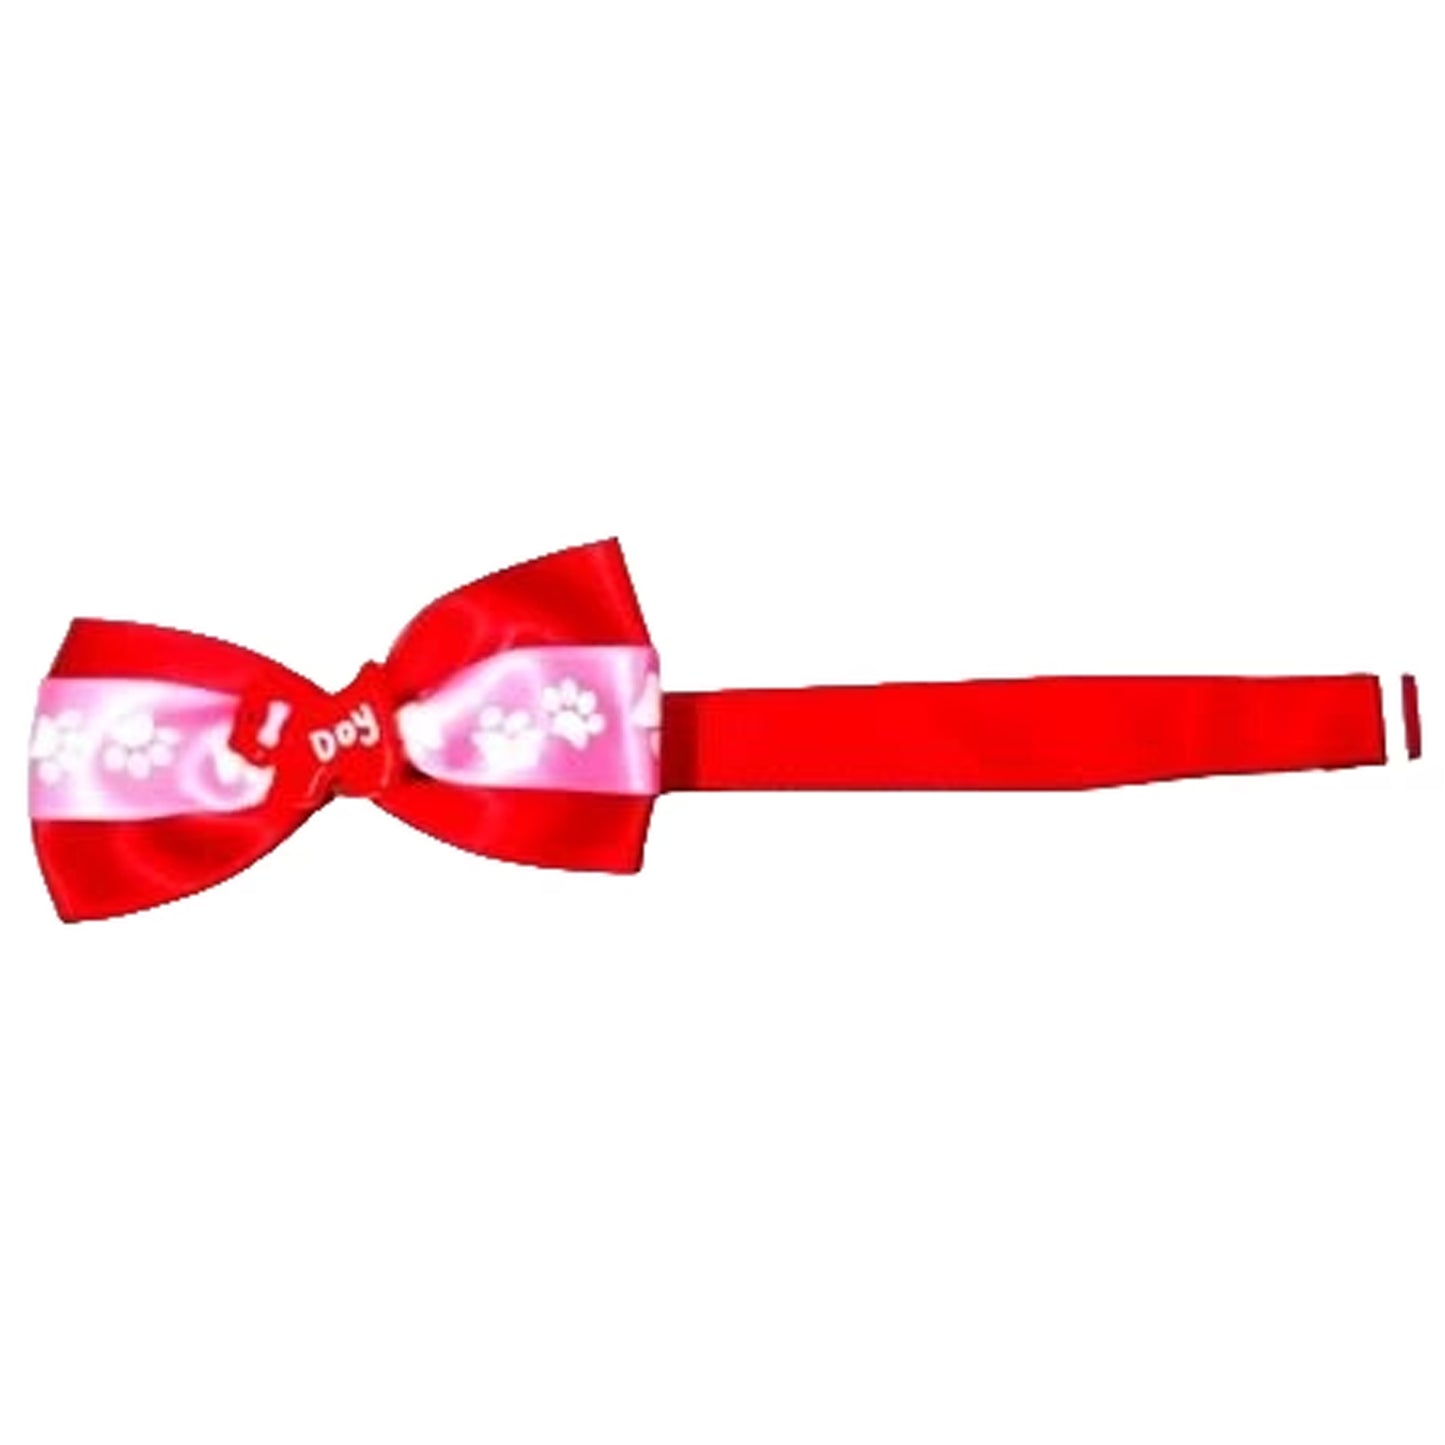 Puppy Love Fancy Neck Bow With Polka Dots Red & Pink - Small